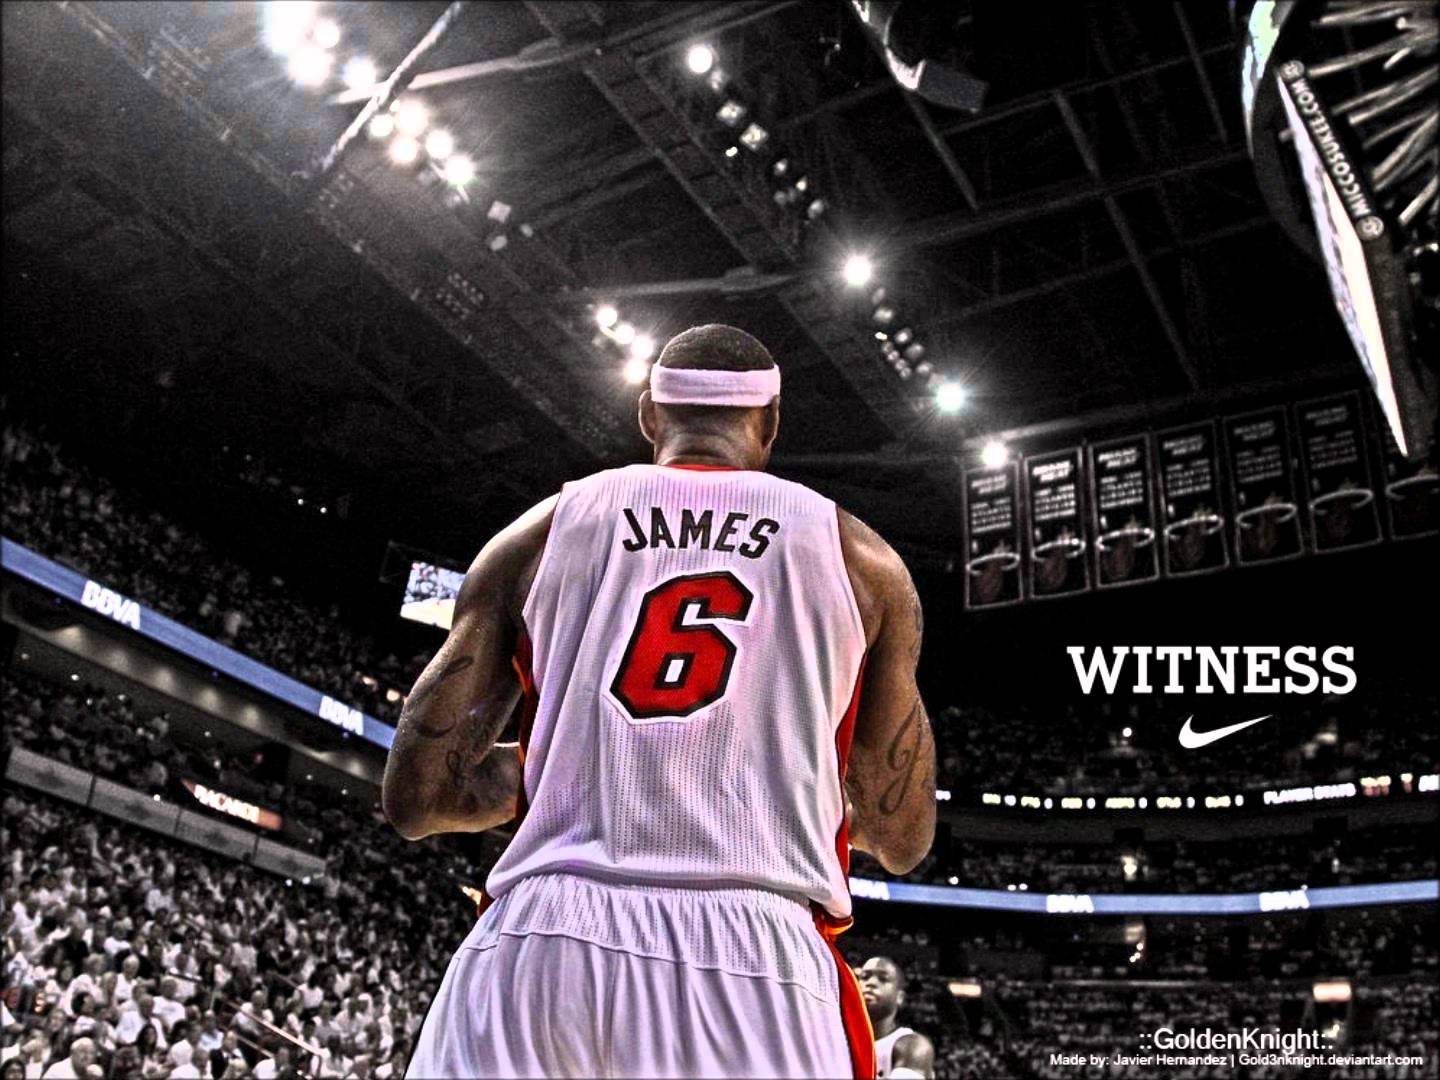 Viewing Gallery For   Lebron James Witness 1440x1080